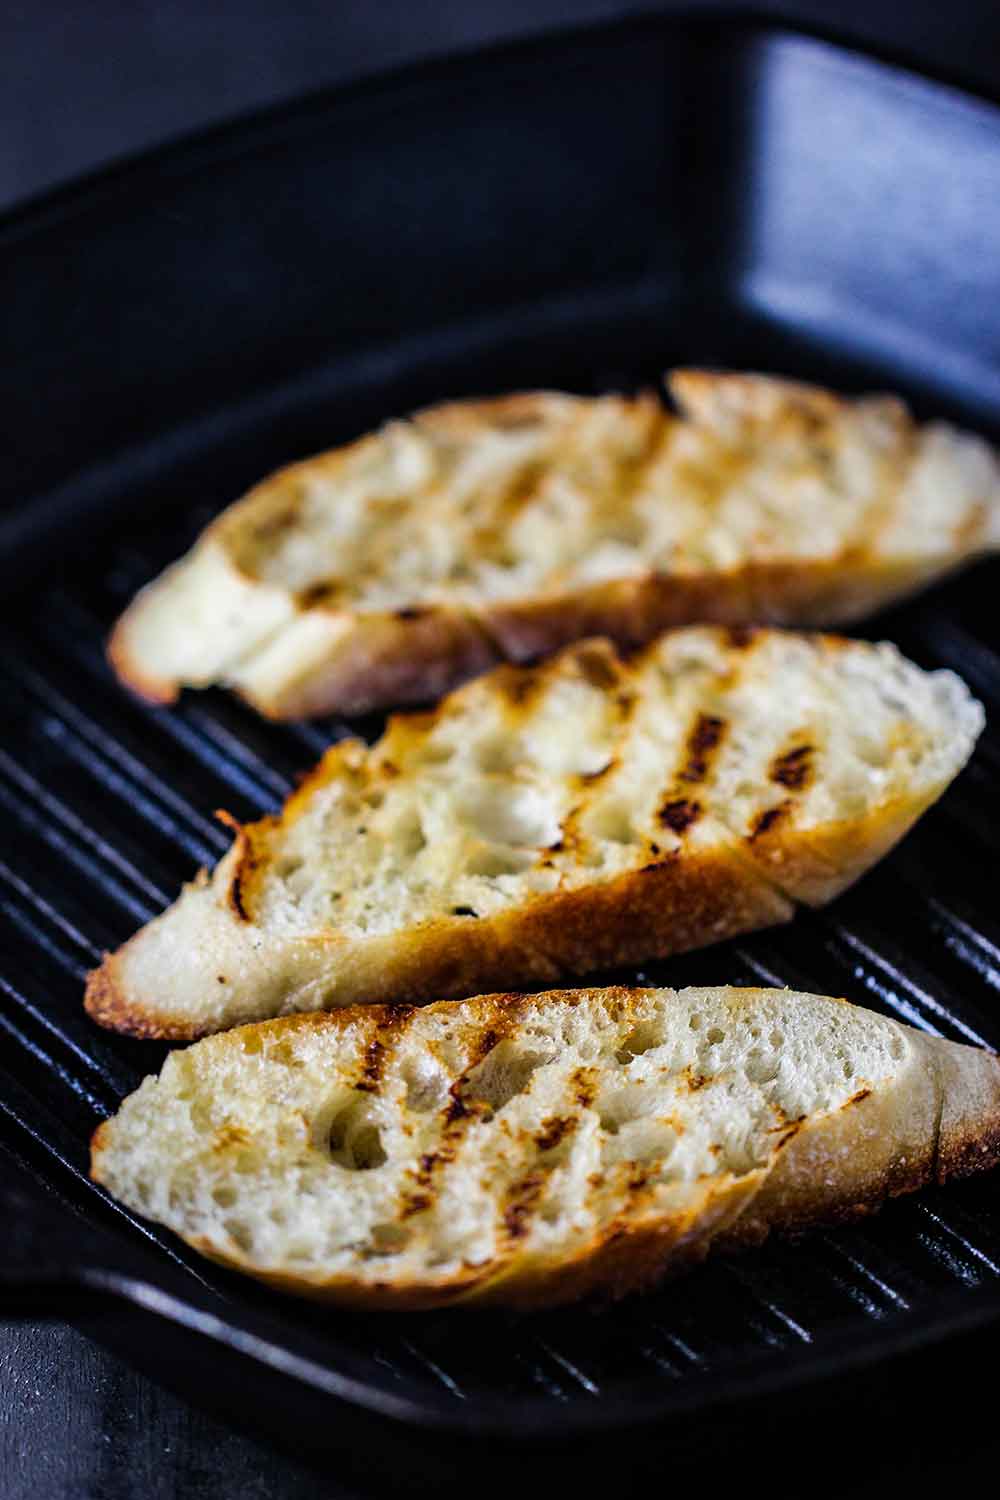 Grill baguette slices for soaking up the Cajun juices. 